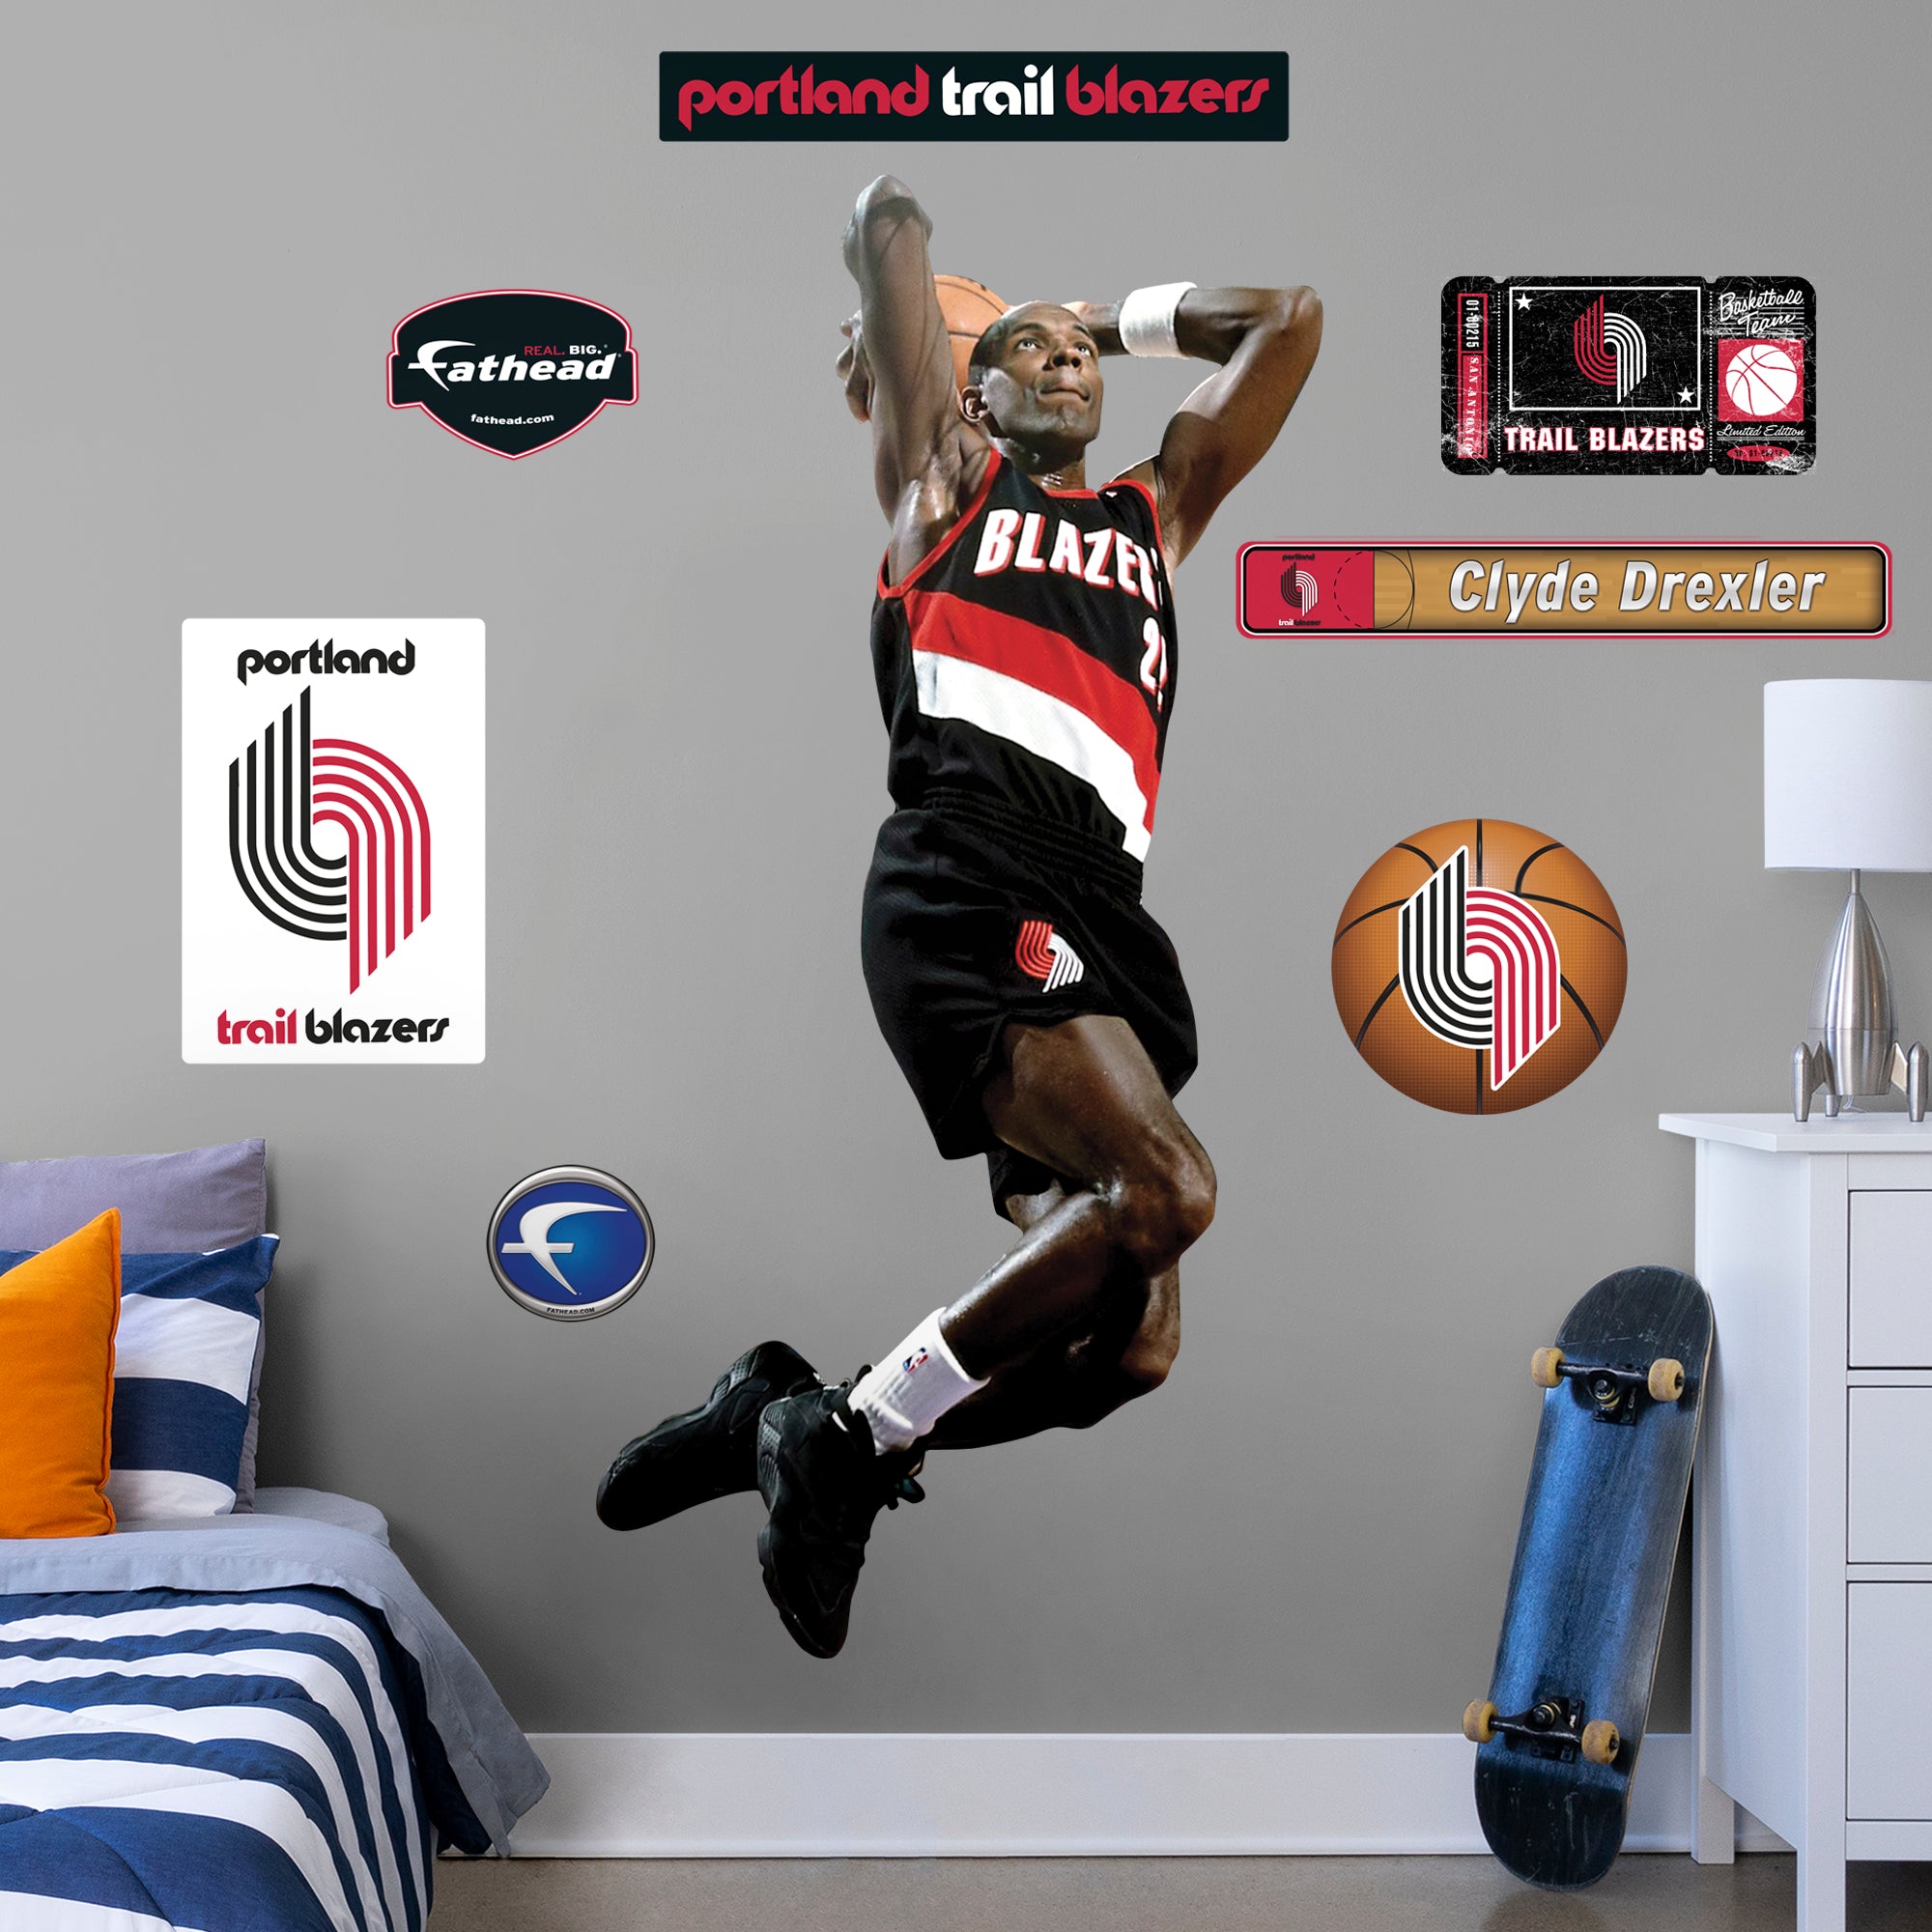 Clyde Drexler Legend - Officially Licensed NBA Removable Wall Decal Life-Size Athlete + 7 Decals (39"W x 80"H) by Fathead | Viny